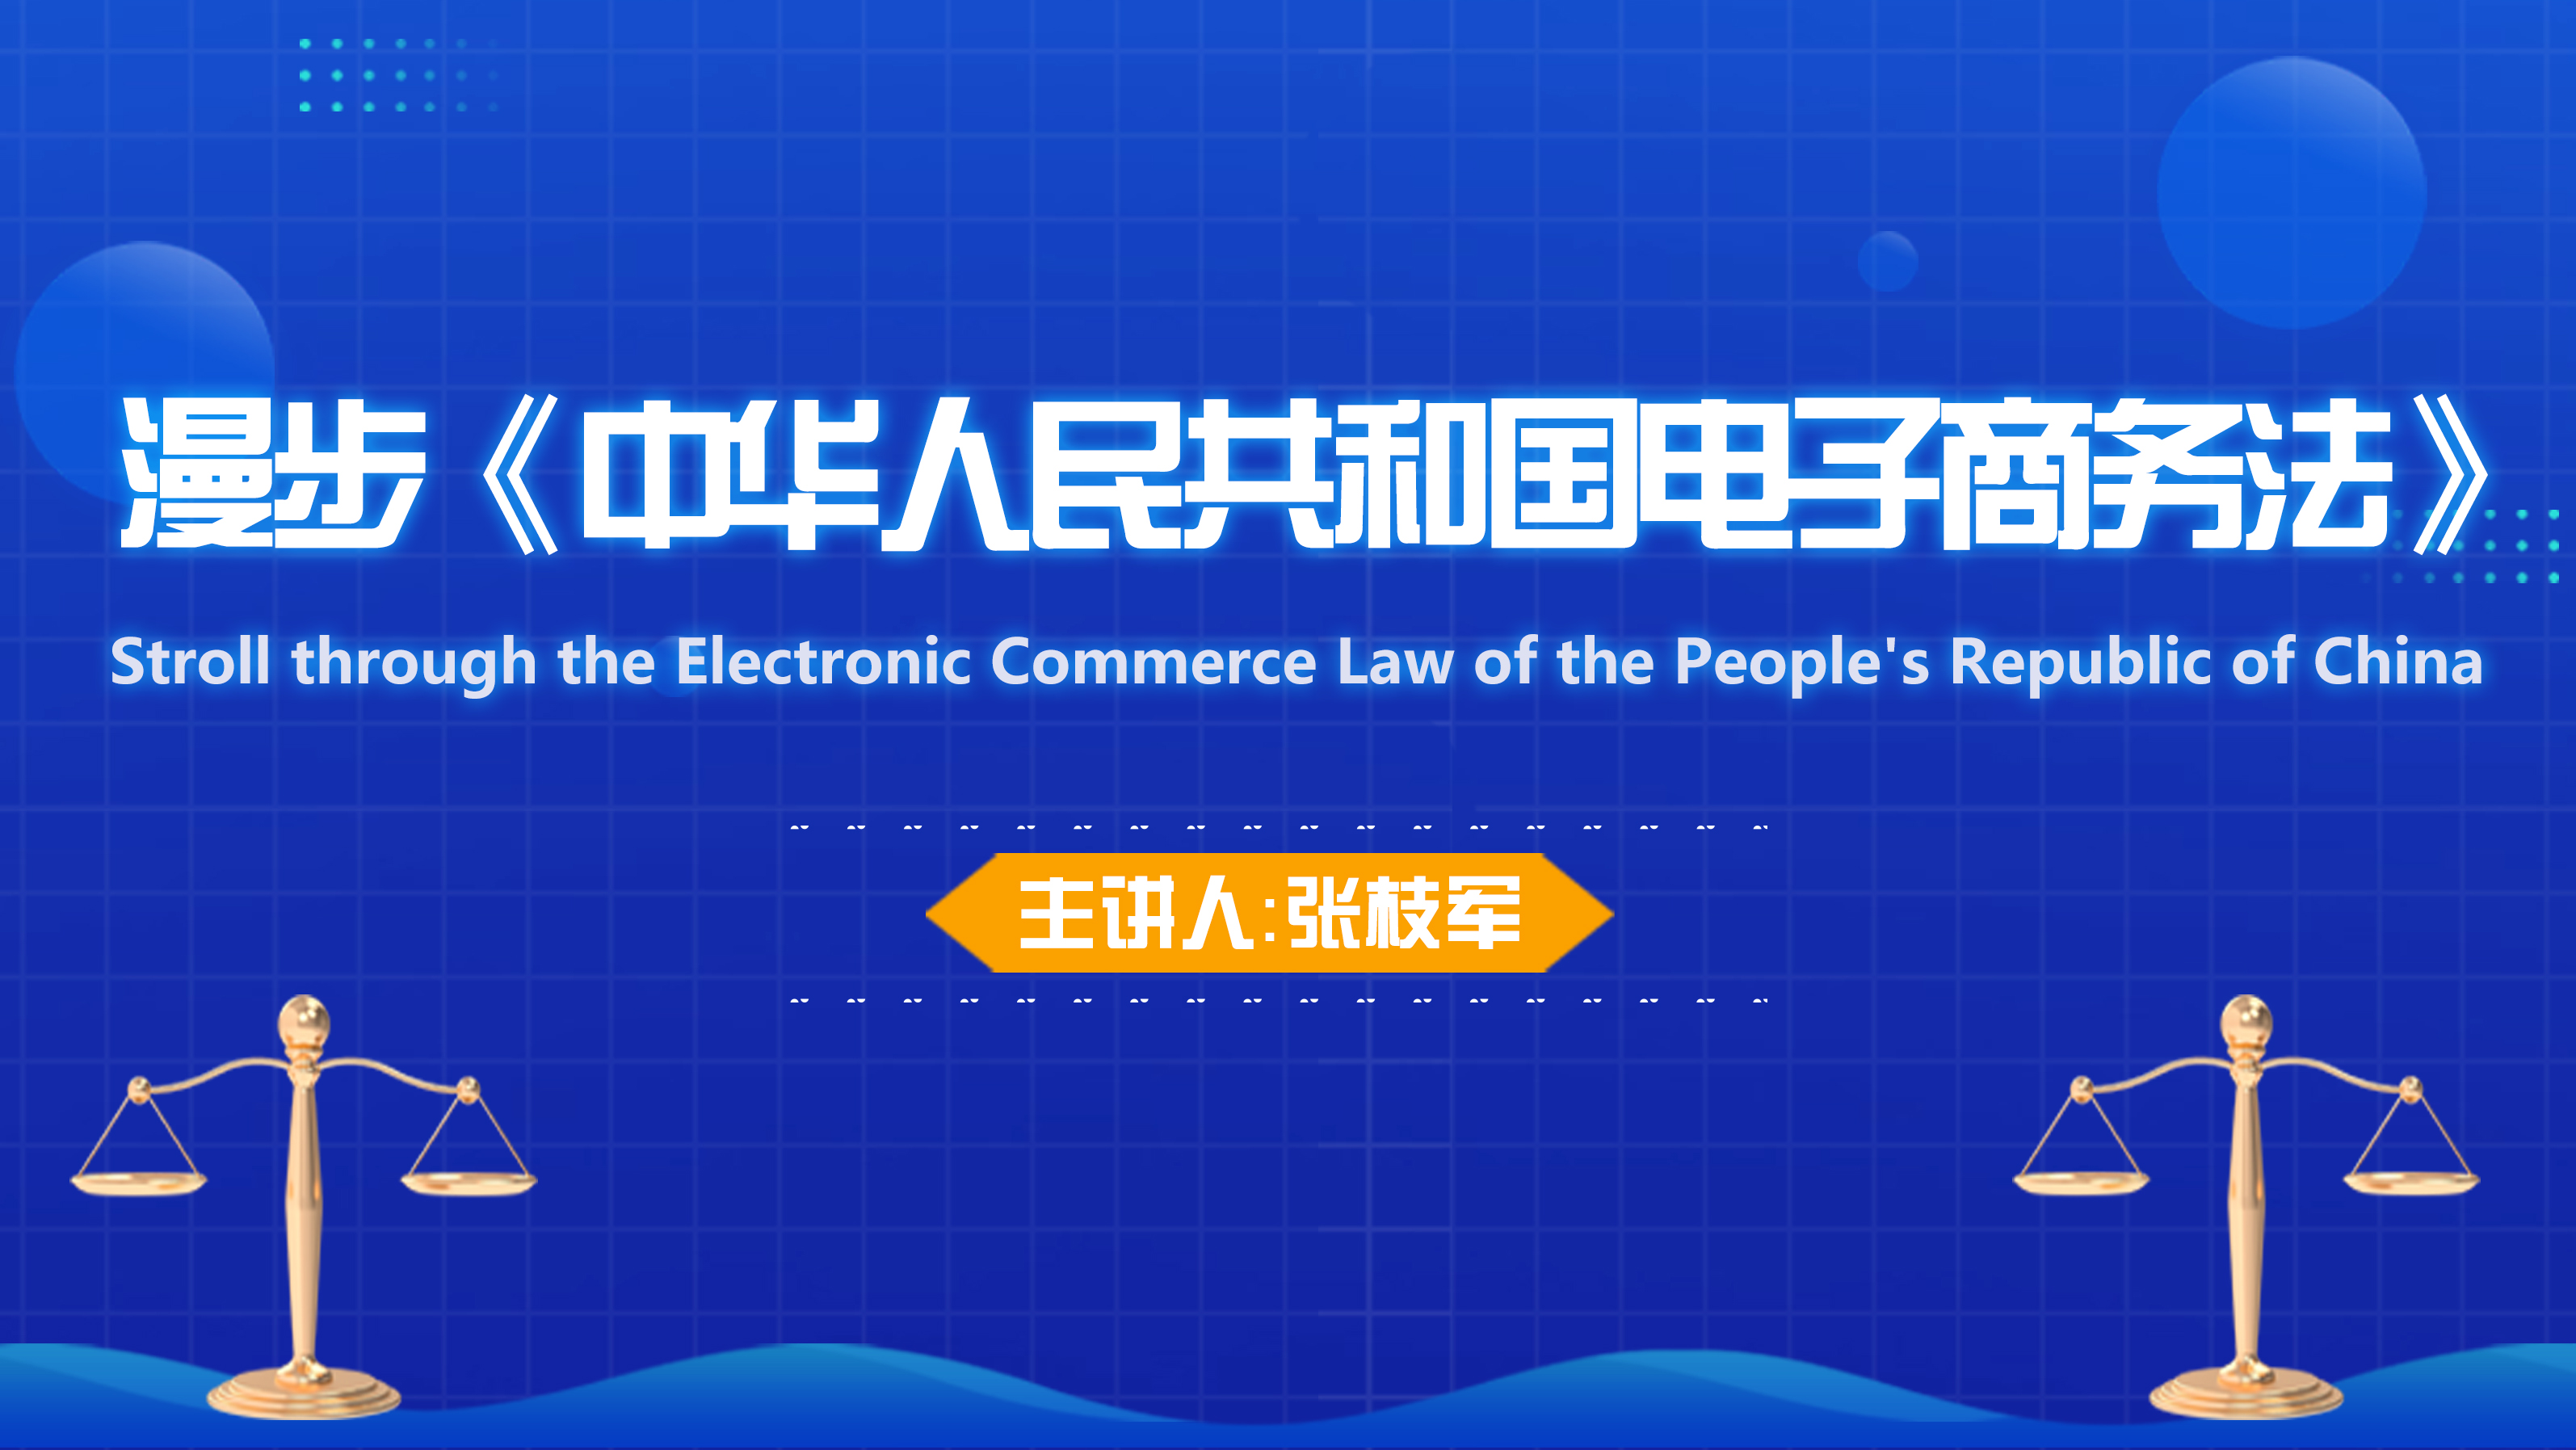 Stroll through the Electronic Commerce Law of the People’s Republic of China